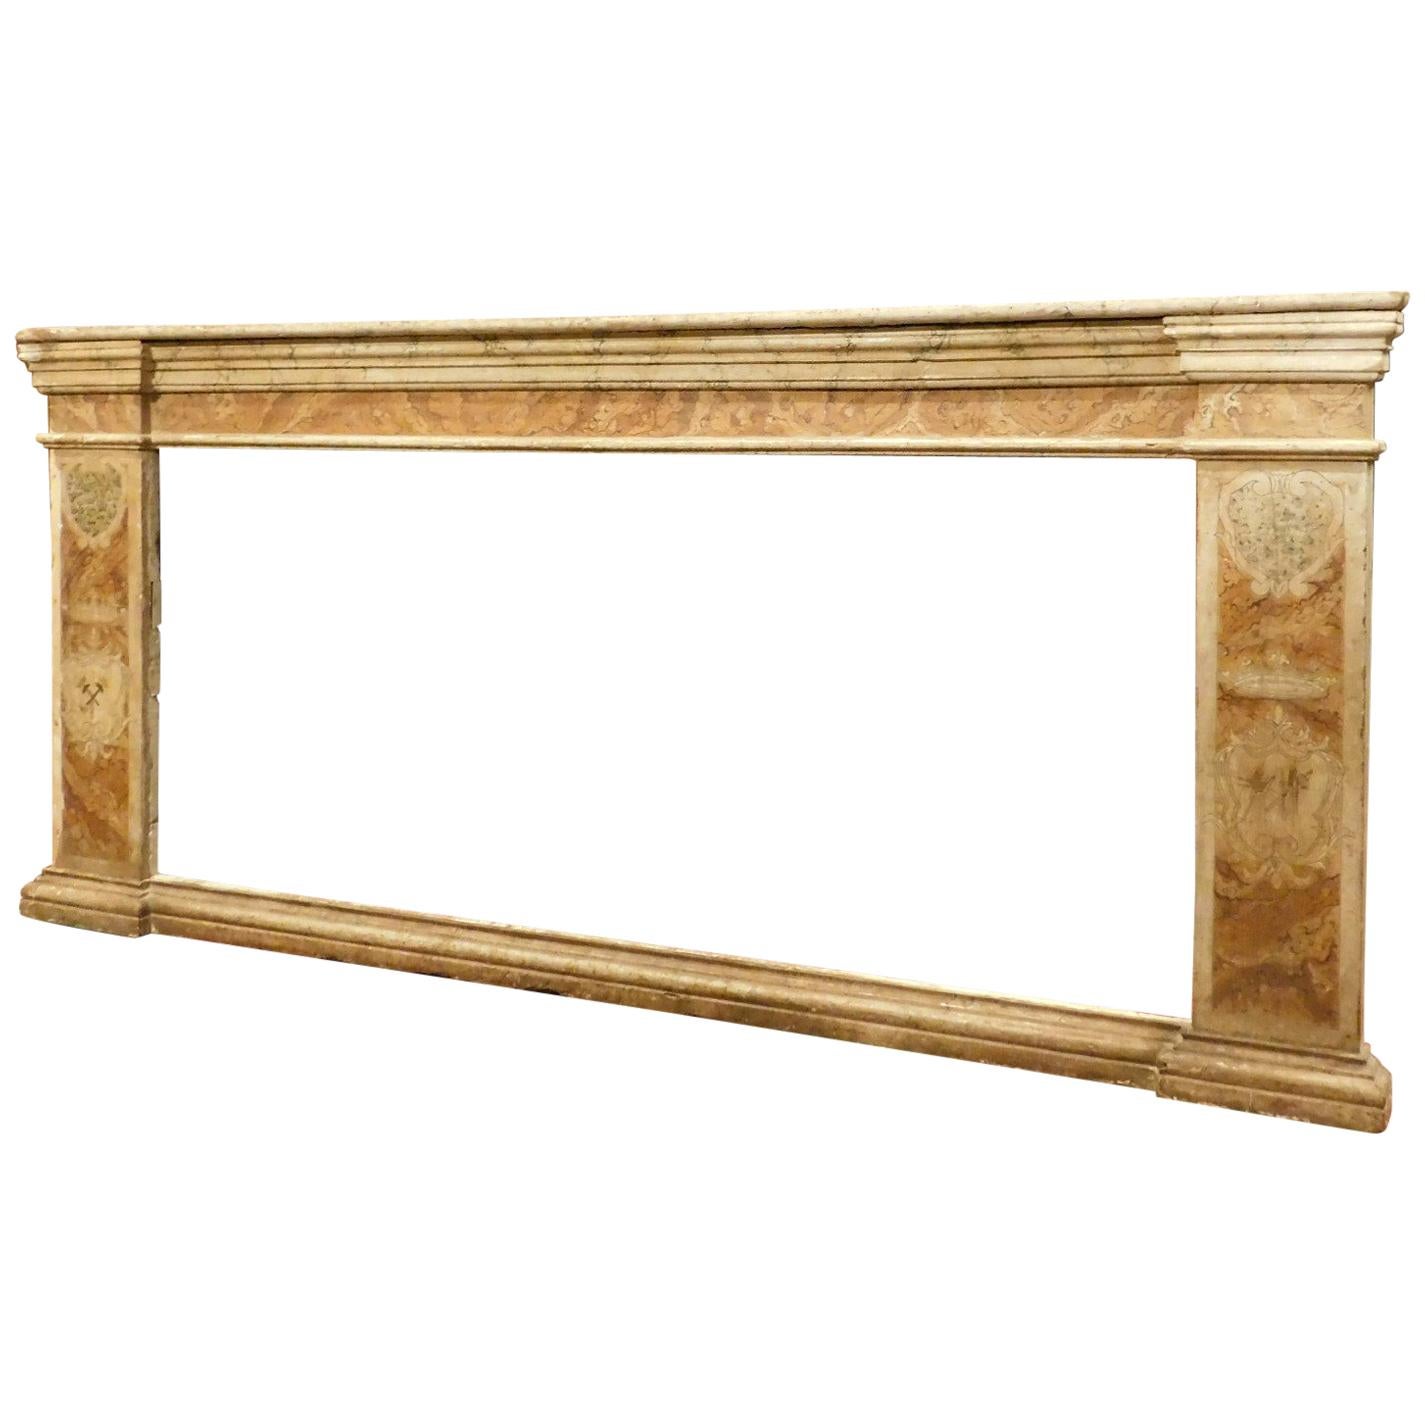 Antique Faux Beige Marble and Peach Lacquered Frame, Italian Church, 1700